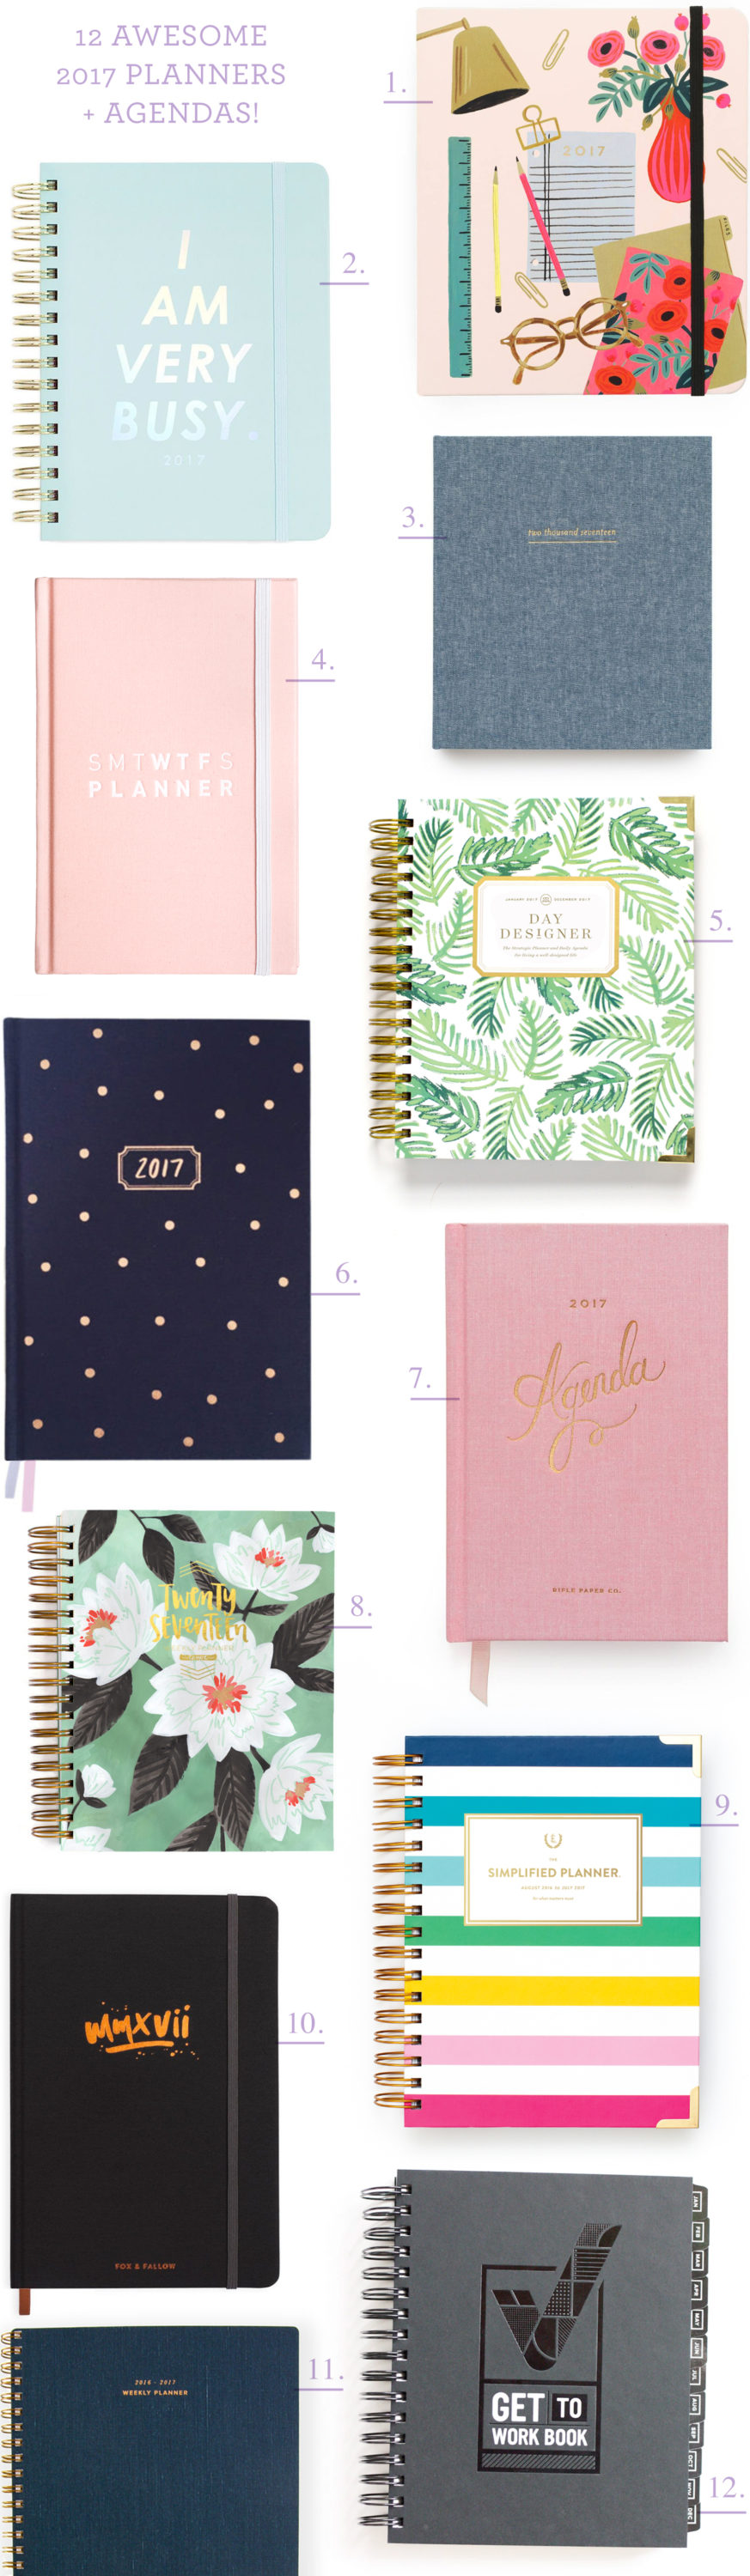 Twelve Awesome 2017 Planners and Agendas